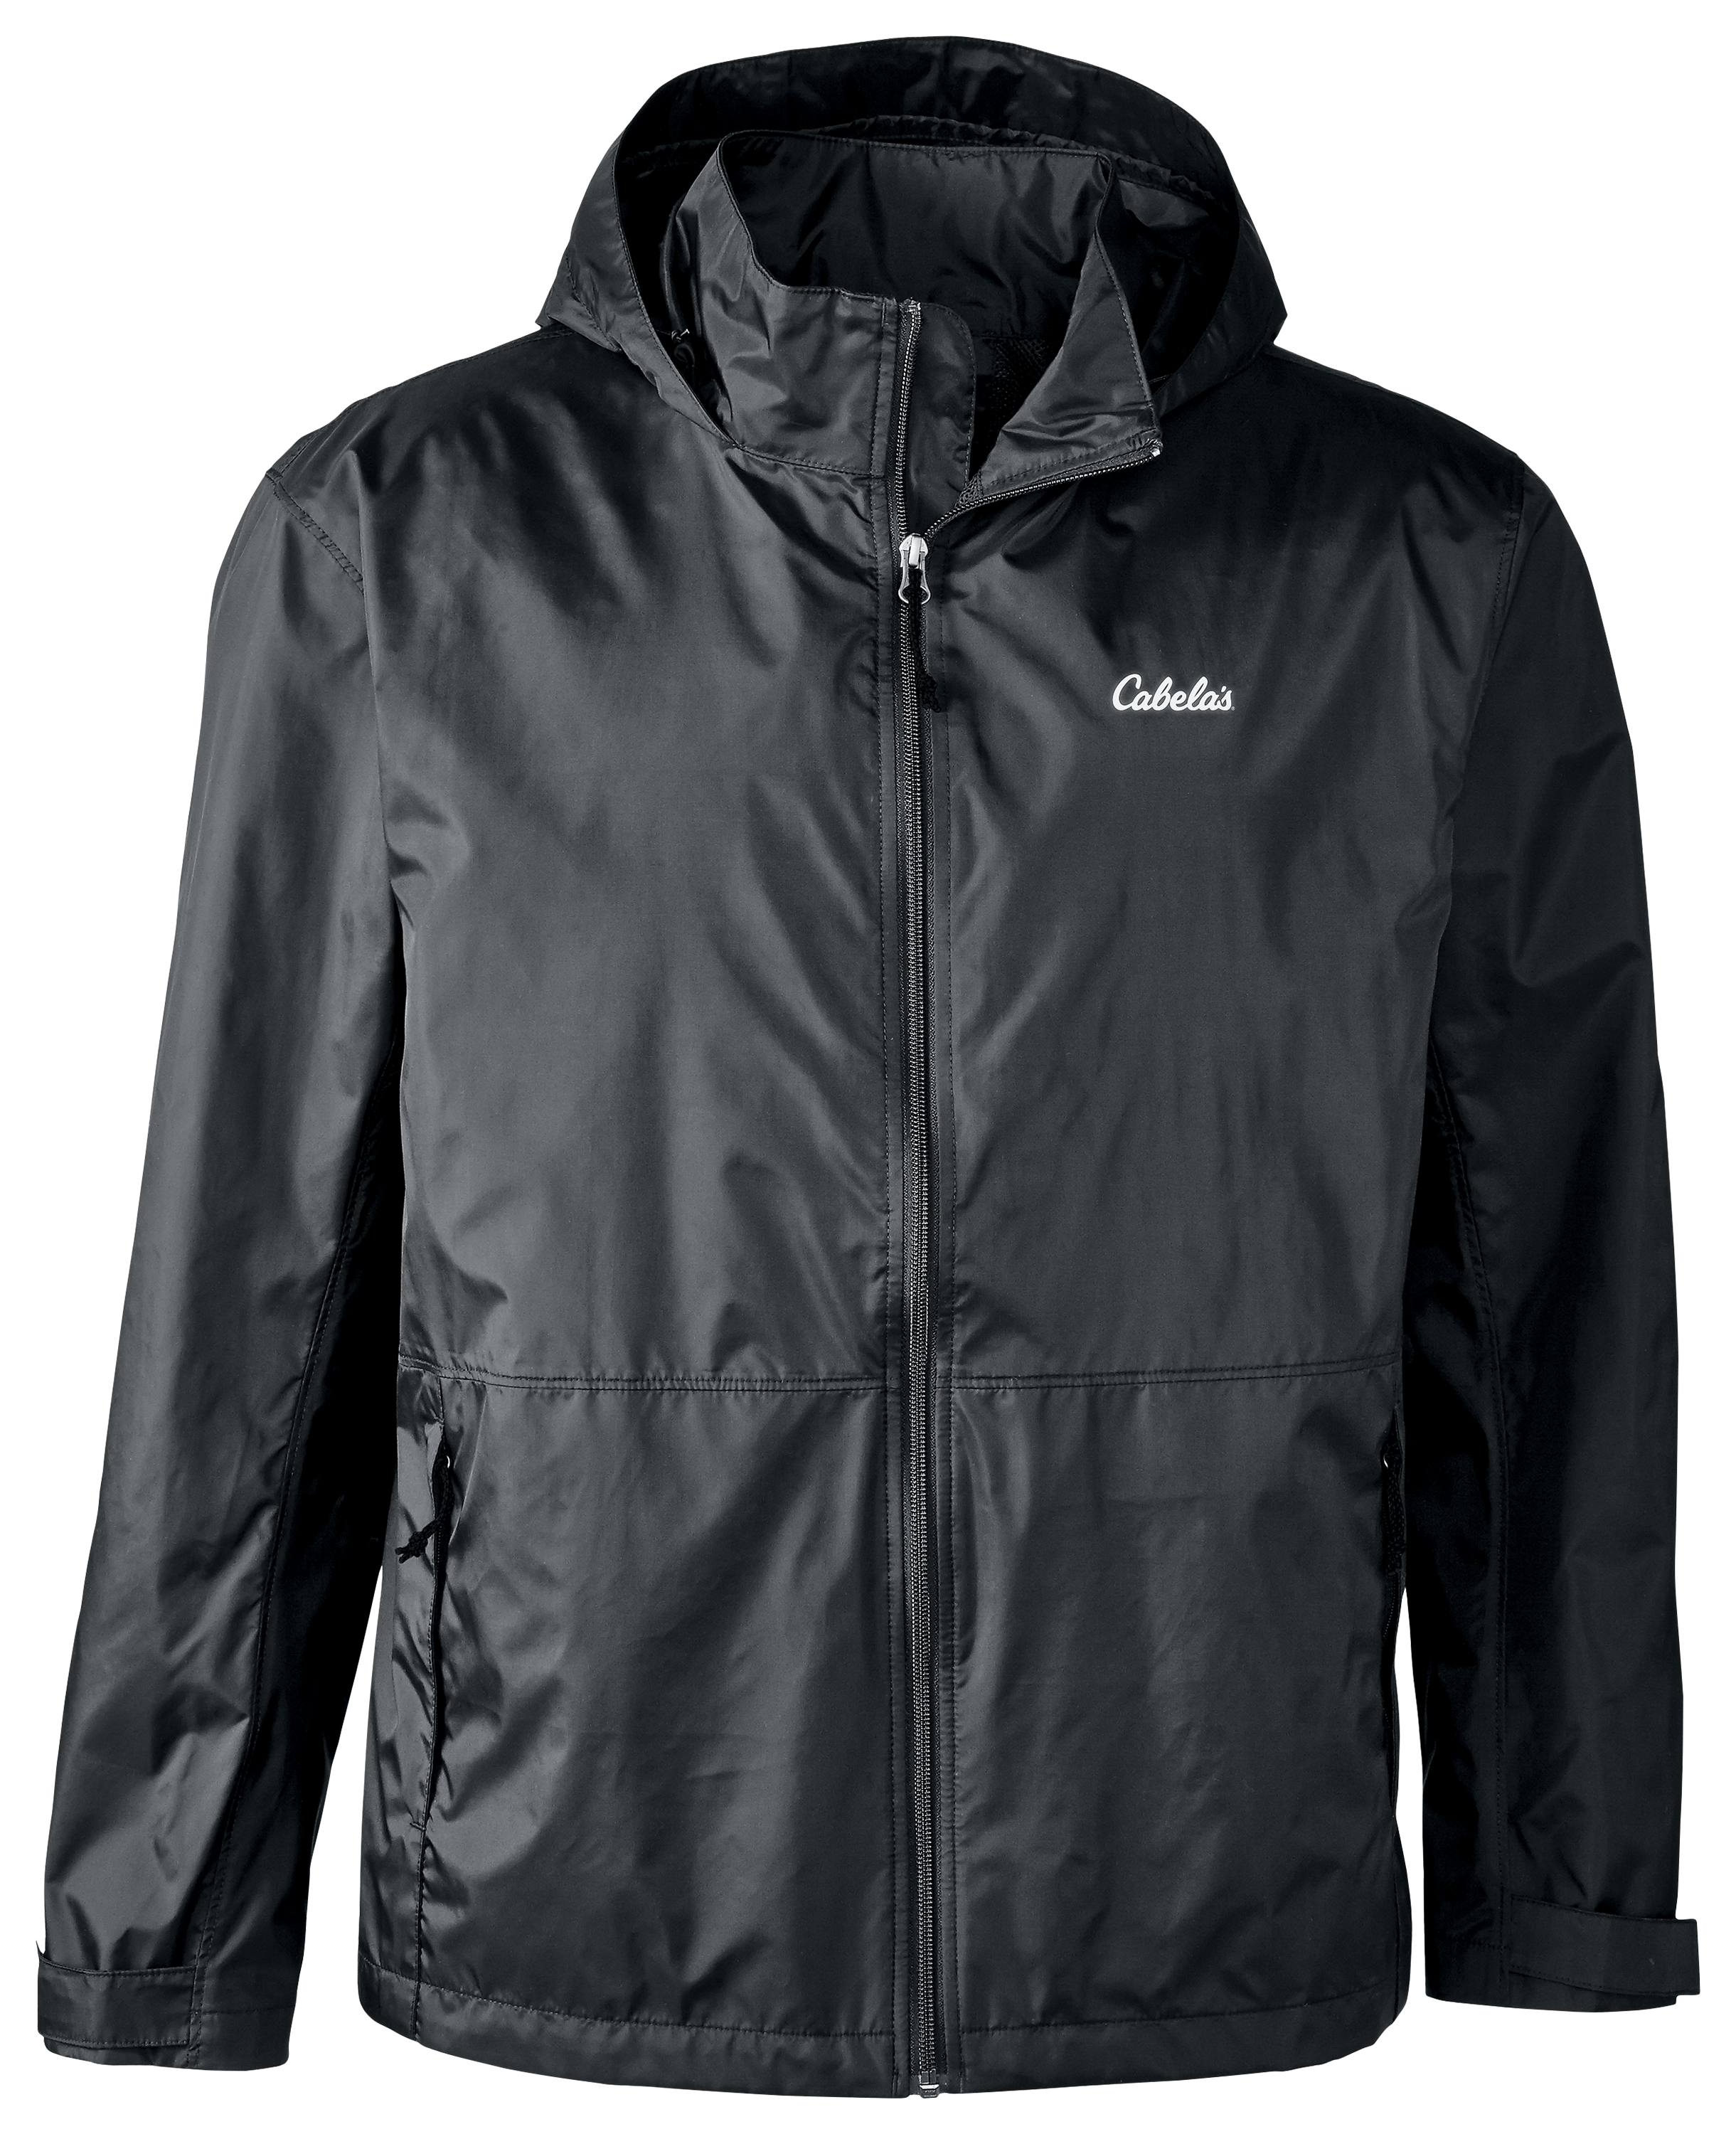 Cabela's Rain Swept Jacket with 4MOST Repel for Men - Spiced Red - 3XL